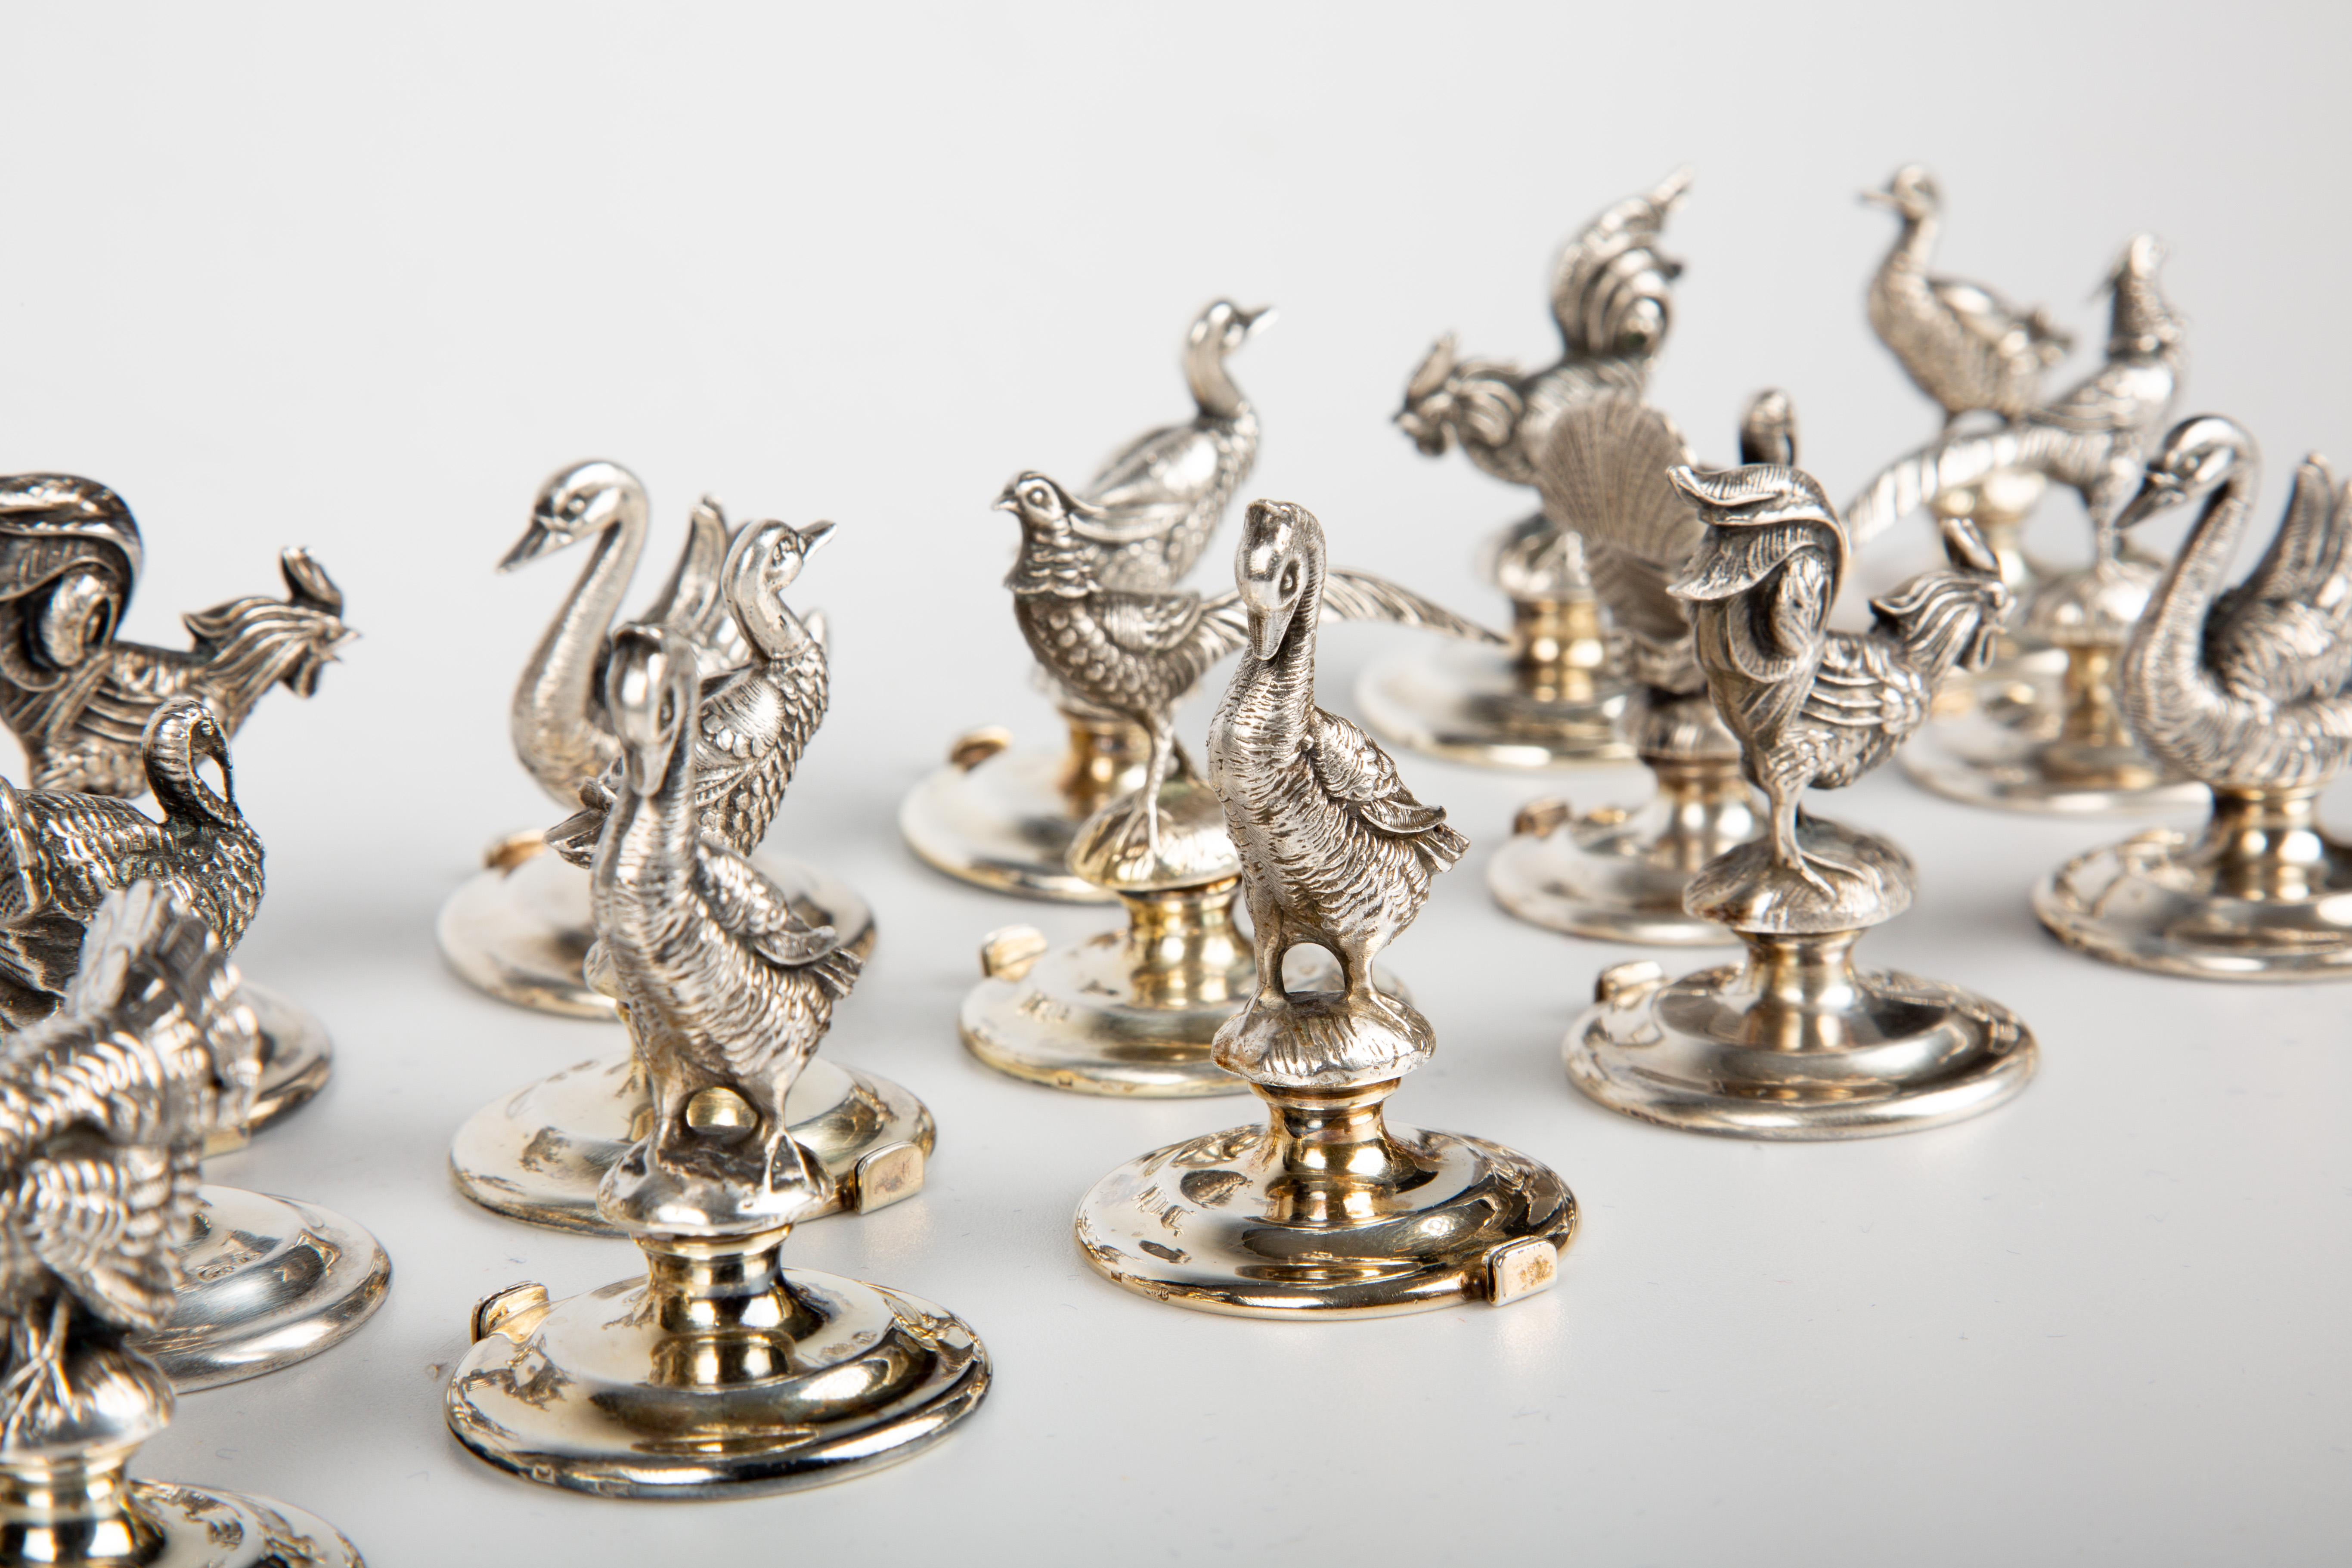 This exquisite collection comprises an exceptionally rare set of 18 Italian silver place card holders, each meticulously designed in the likeness of various avian species, including Turkeys, Pheasants, Quails, Ducks, Chickens, and Swans. These